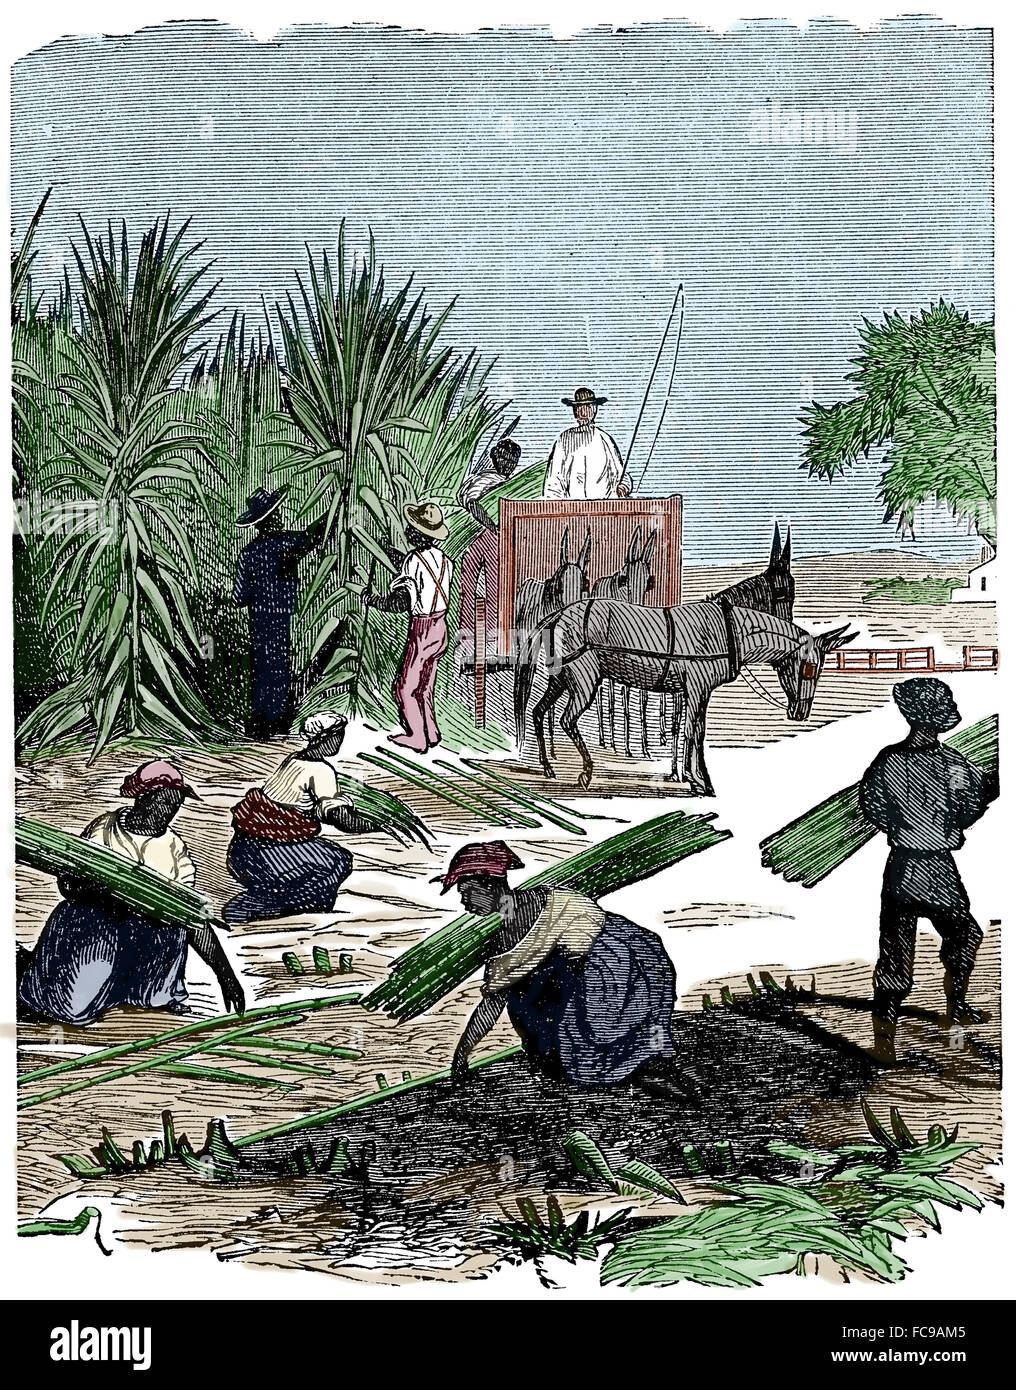 Harvesting sugarcane by hand. Engraving. Color, 19th century. Stock Photo